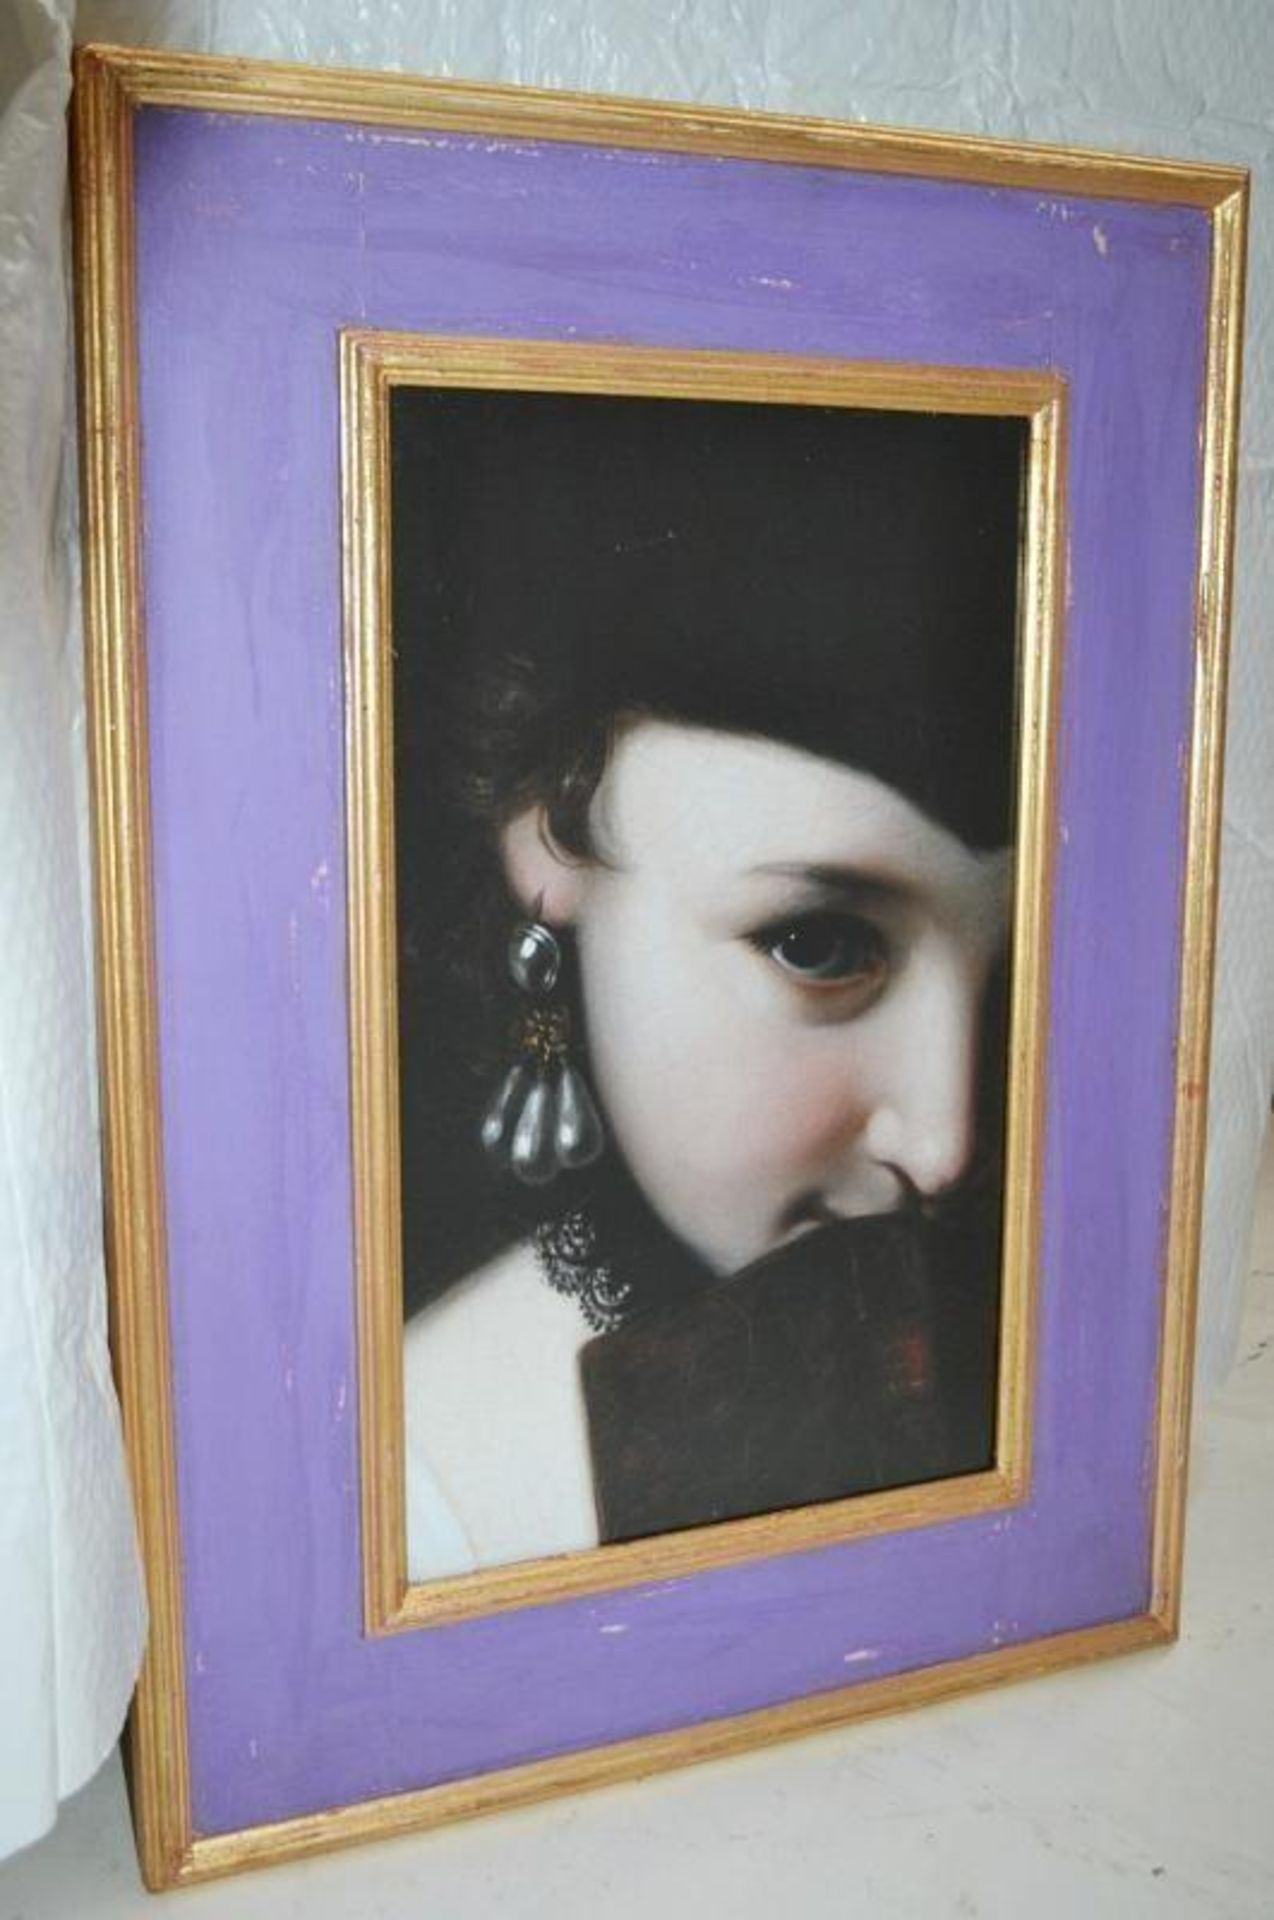 1 x Moissonnier Frères From France -&nbsp; Framed Picture Of Lady&nbsp;- Dimensions Length H72 x 53